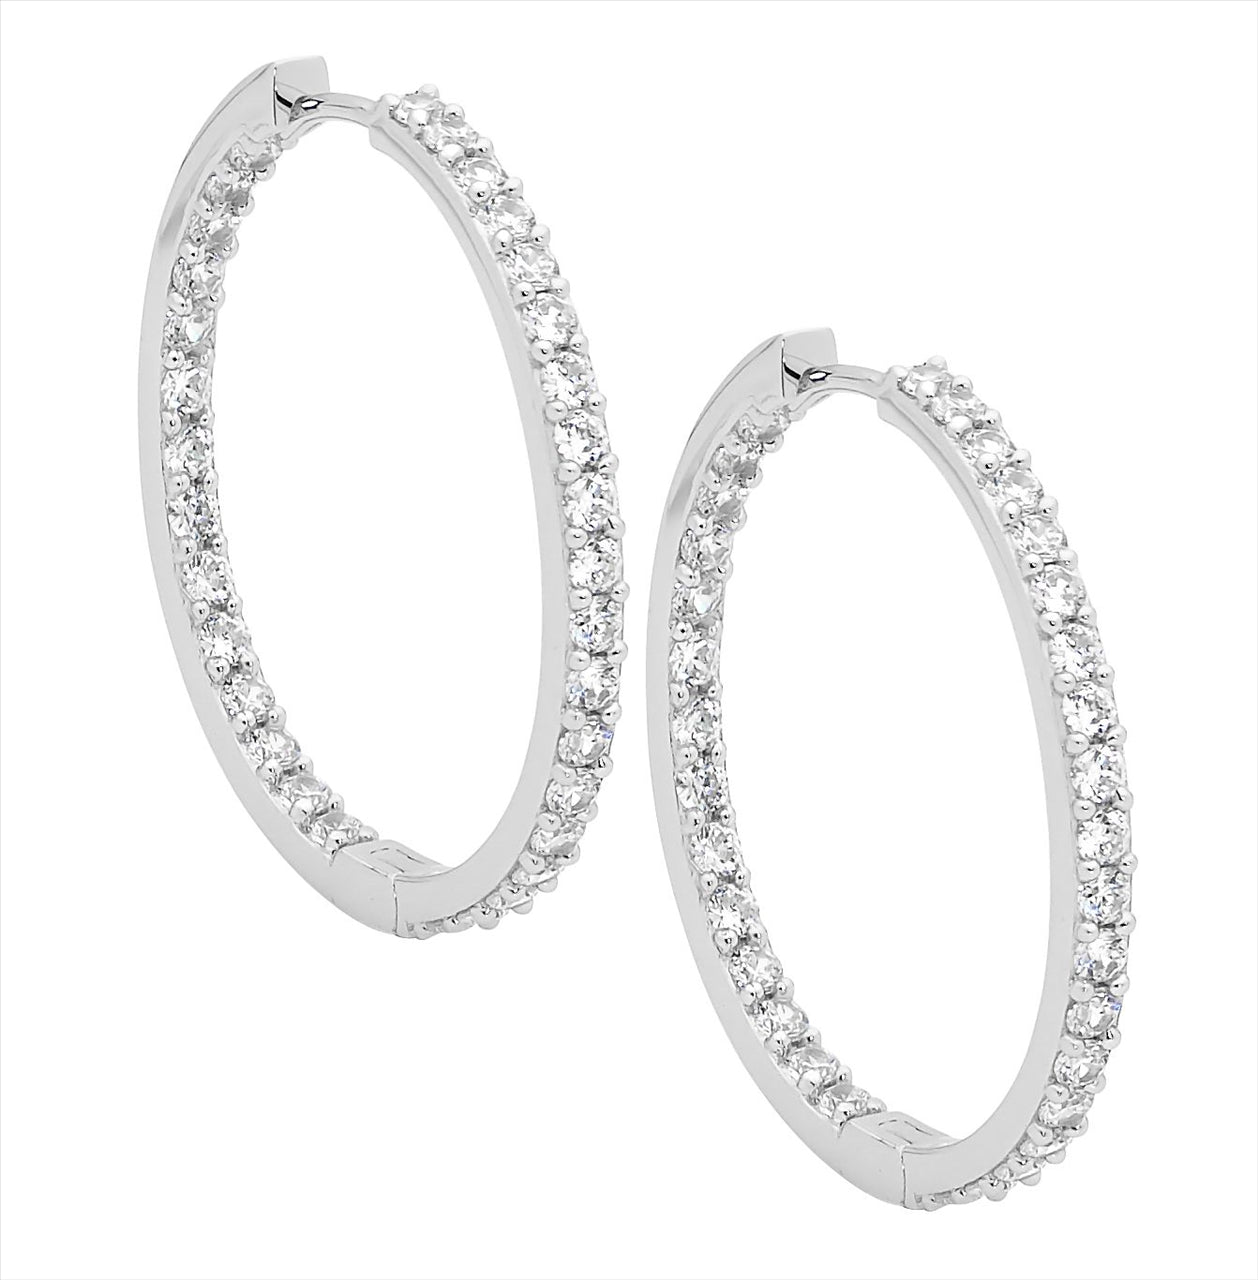 Cubic Zirconia Hoops Inside Out - Sterling Silver.